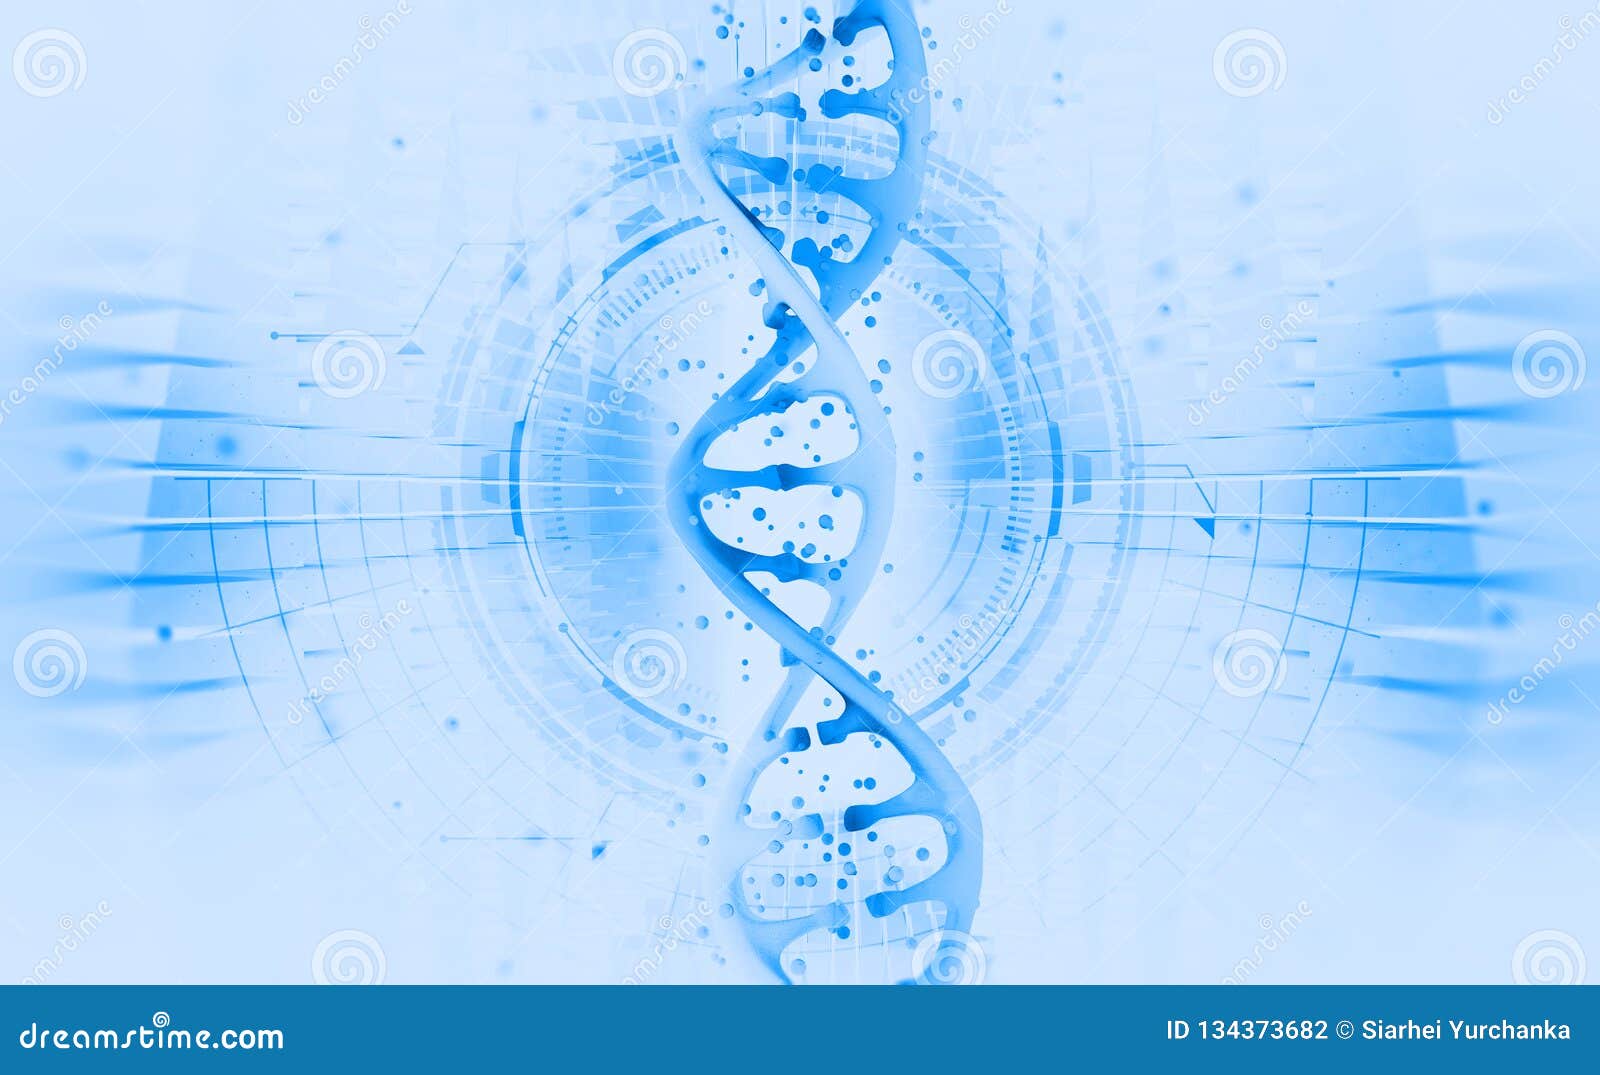 dna helix. hi tech technology in the field of genetic engineering. work on artificial intelligence